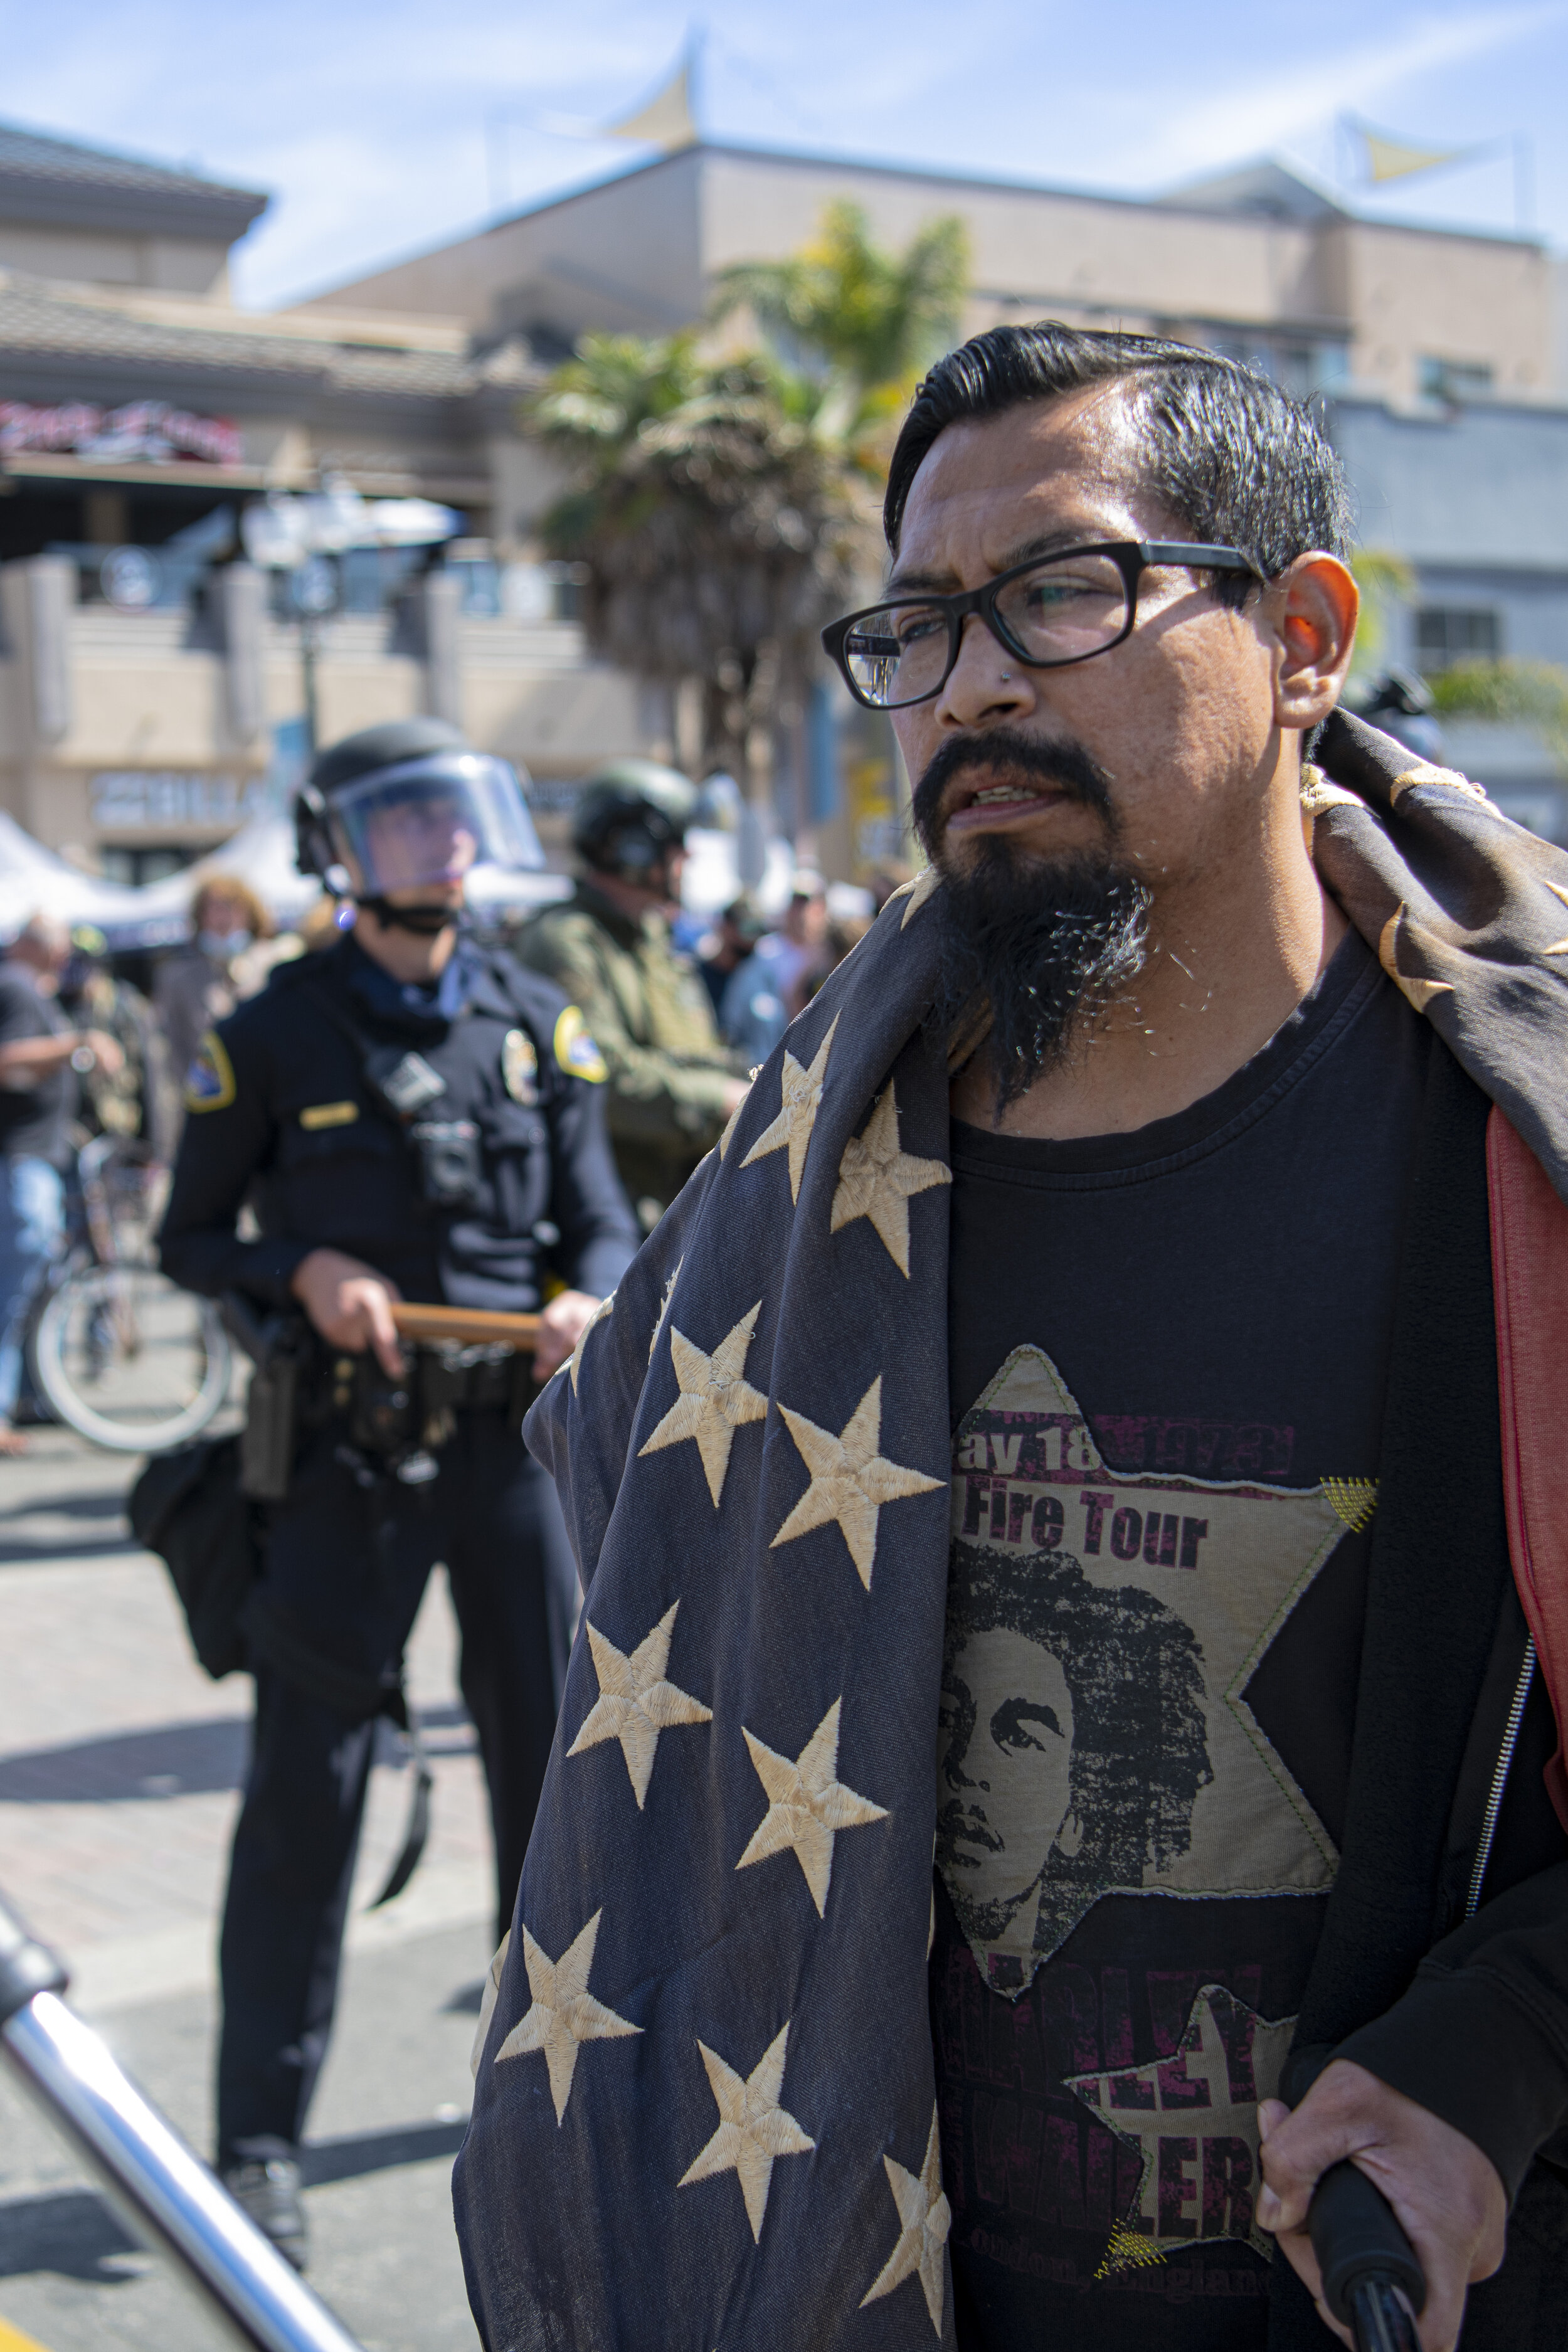  A protester walks among the swat officers with a distressed American flag at the Black Lives Matter/ White Lives Matter protest held in Huntington Beach, Calif. on March 11, 2021. (Jon Putman / The Corsair) 